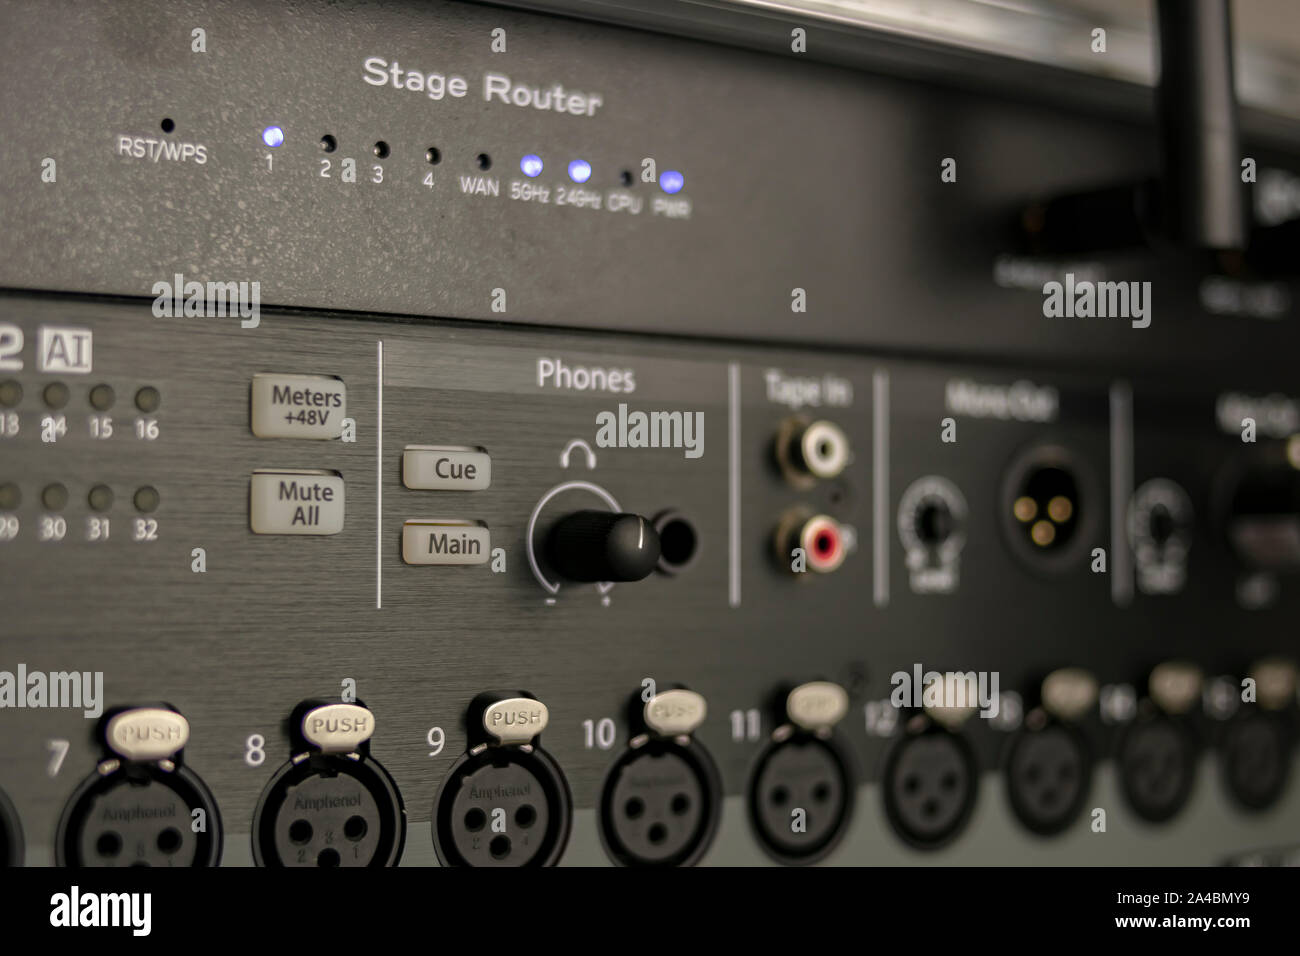 Set of audio inputs on a stage mixer with headphone output, phantom power buttons and stage router status LEDs Stock Photo